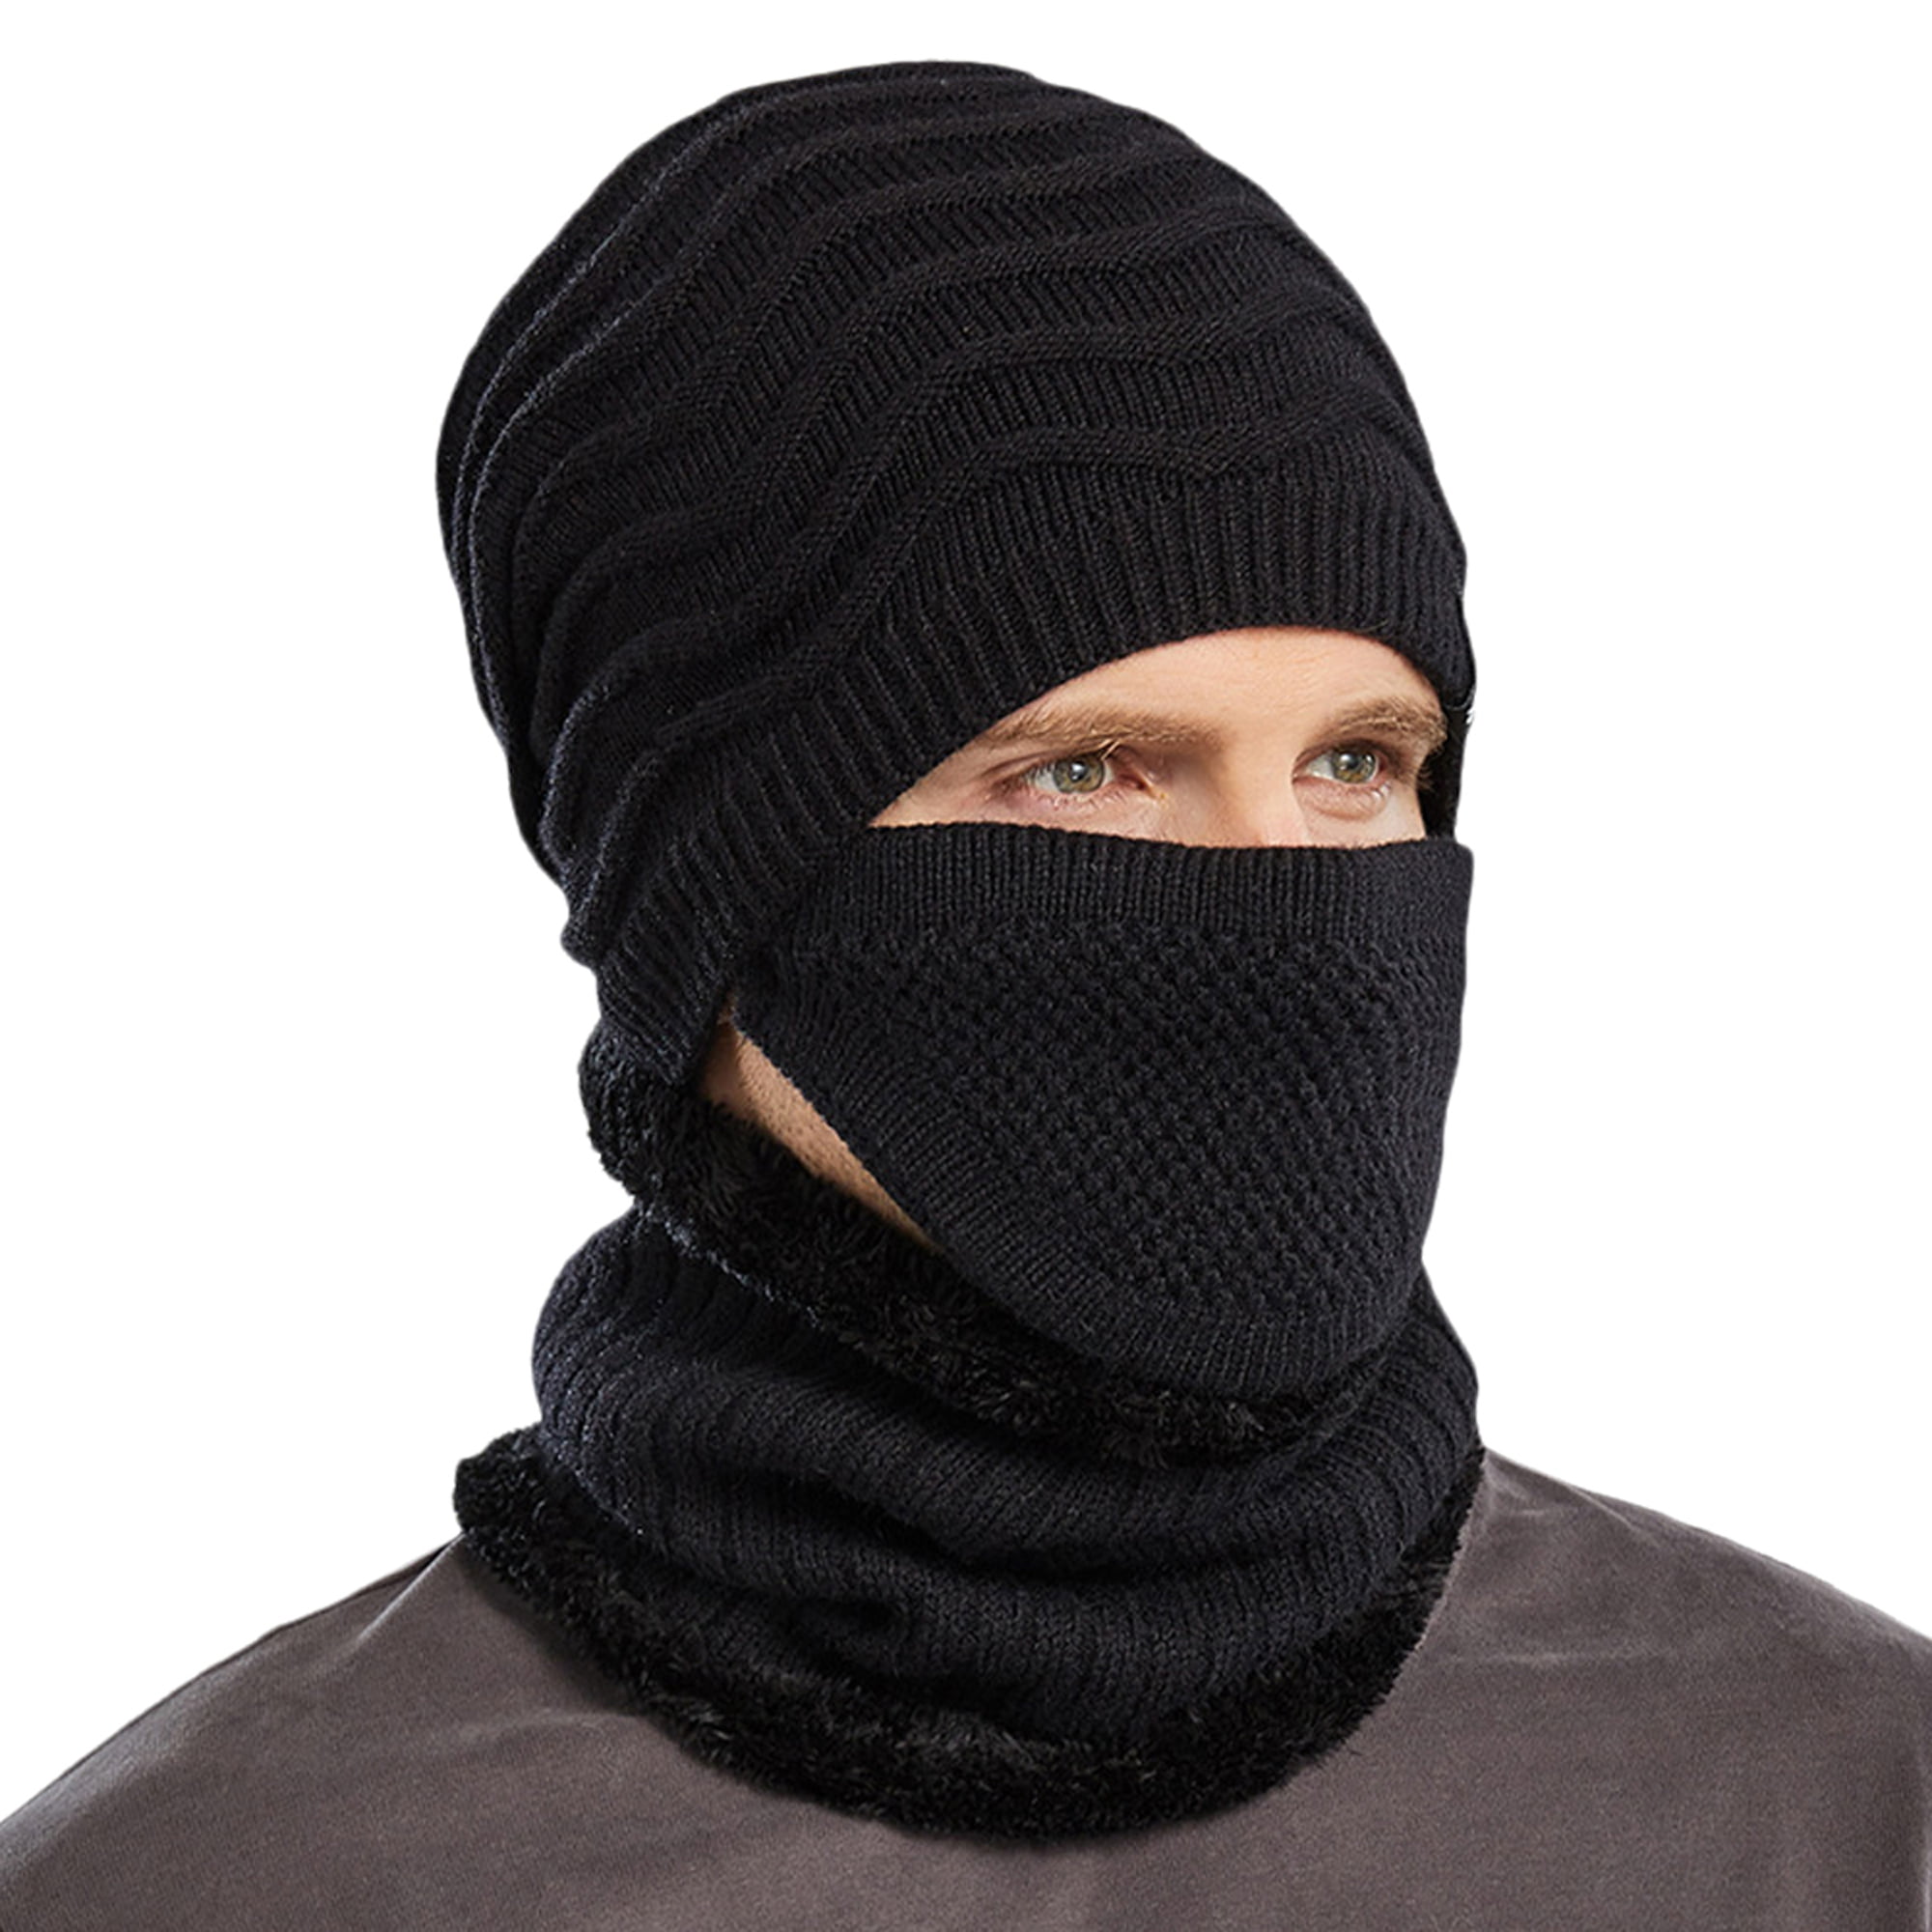 Men's Winter Outdoor Ski Thermal Face Covers Beanie Hats Casual Balaclava Caps 